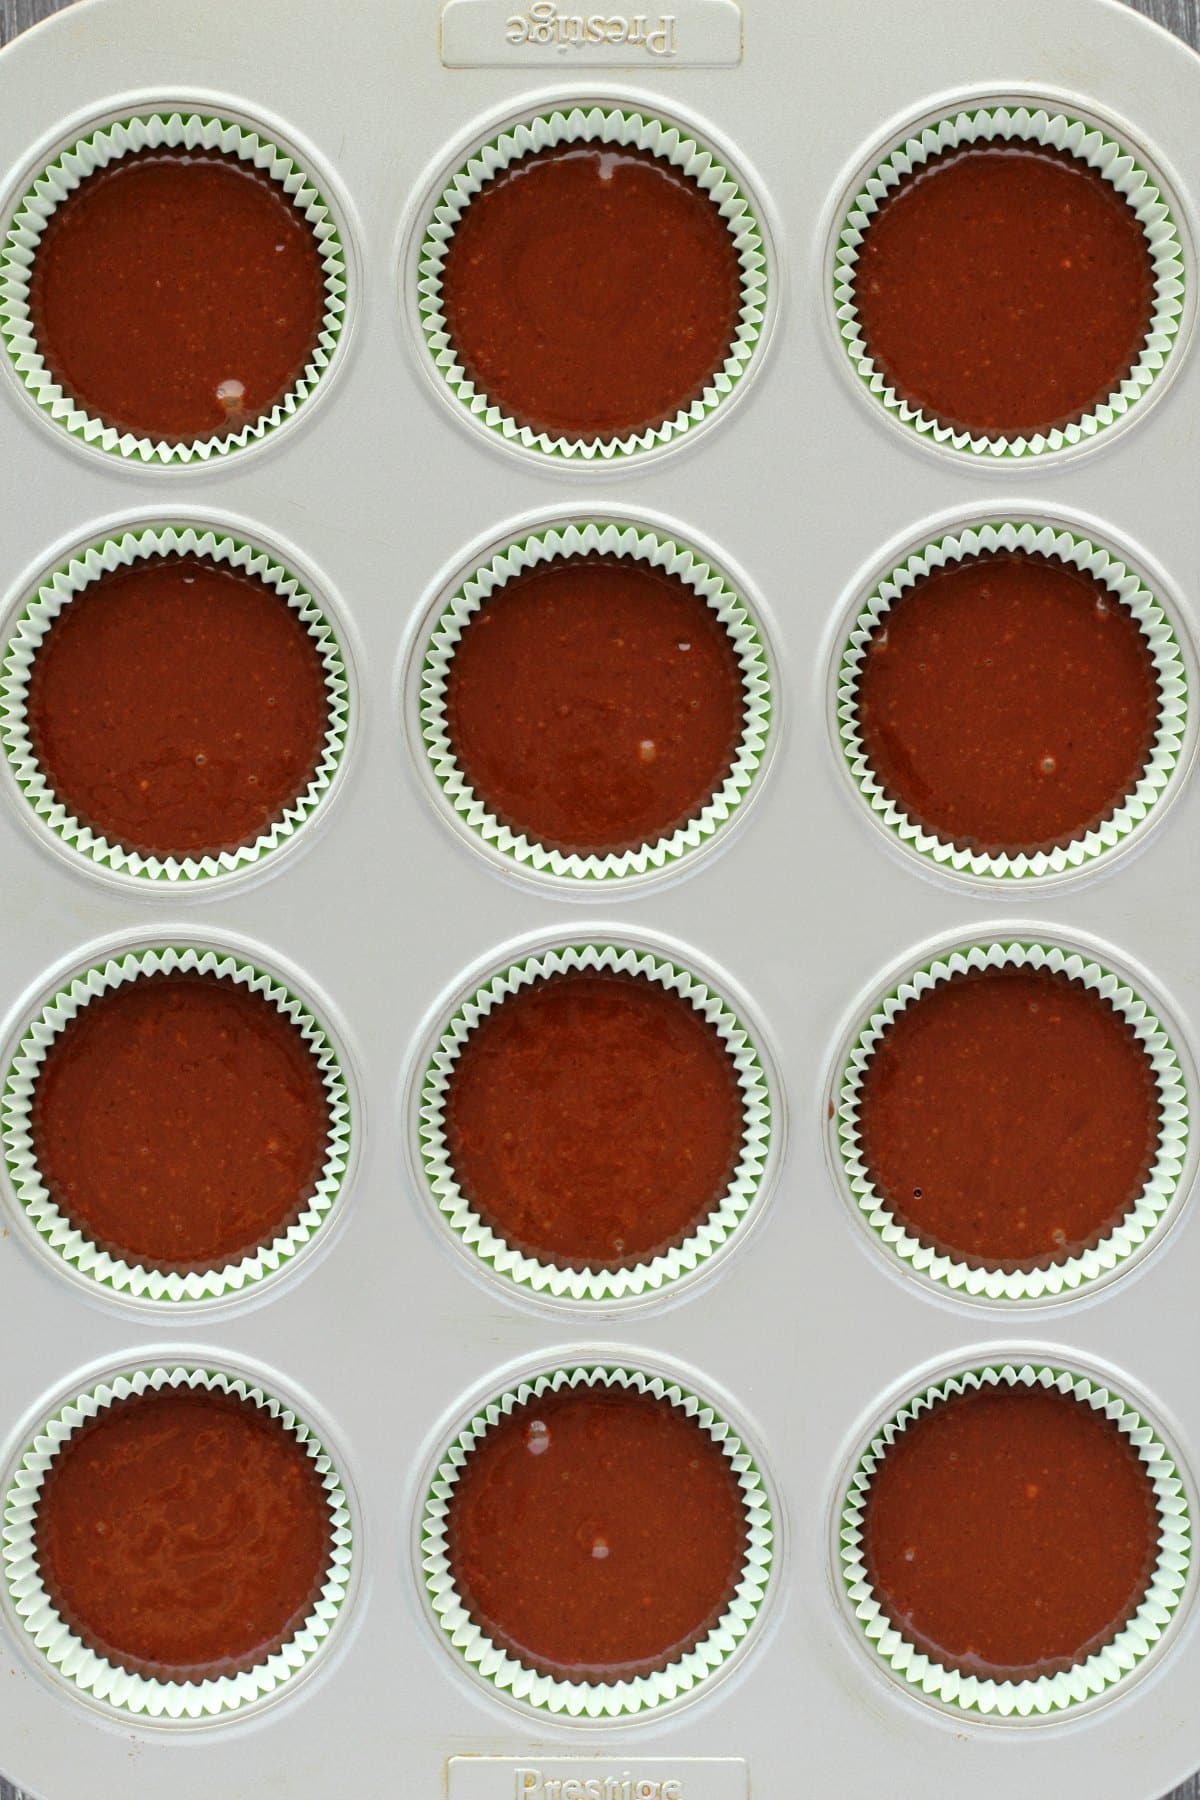 Batter for chocolate cupcakes in a cupcake tray ready to bake.